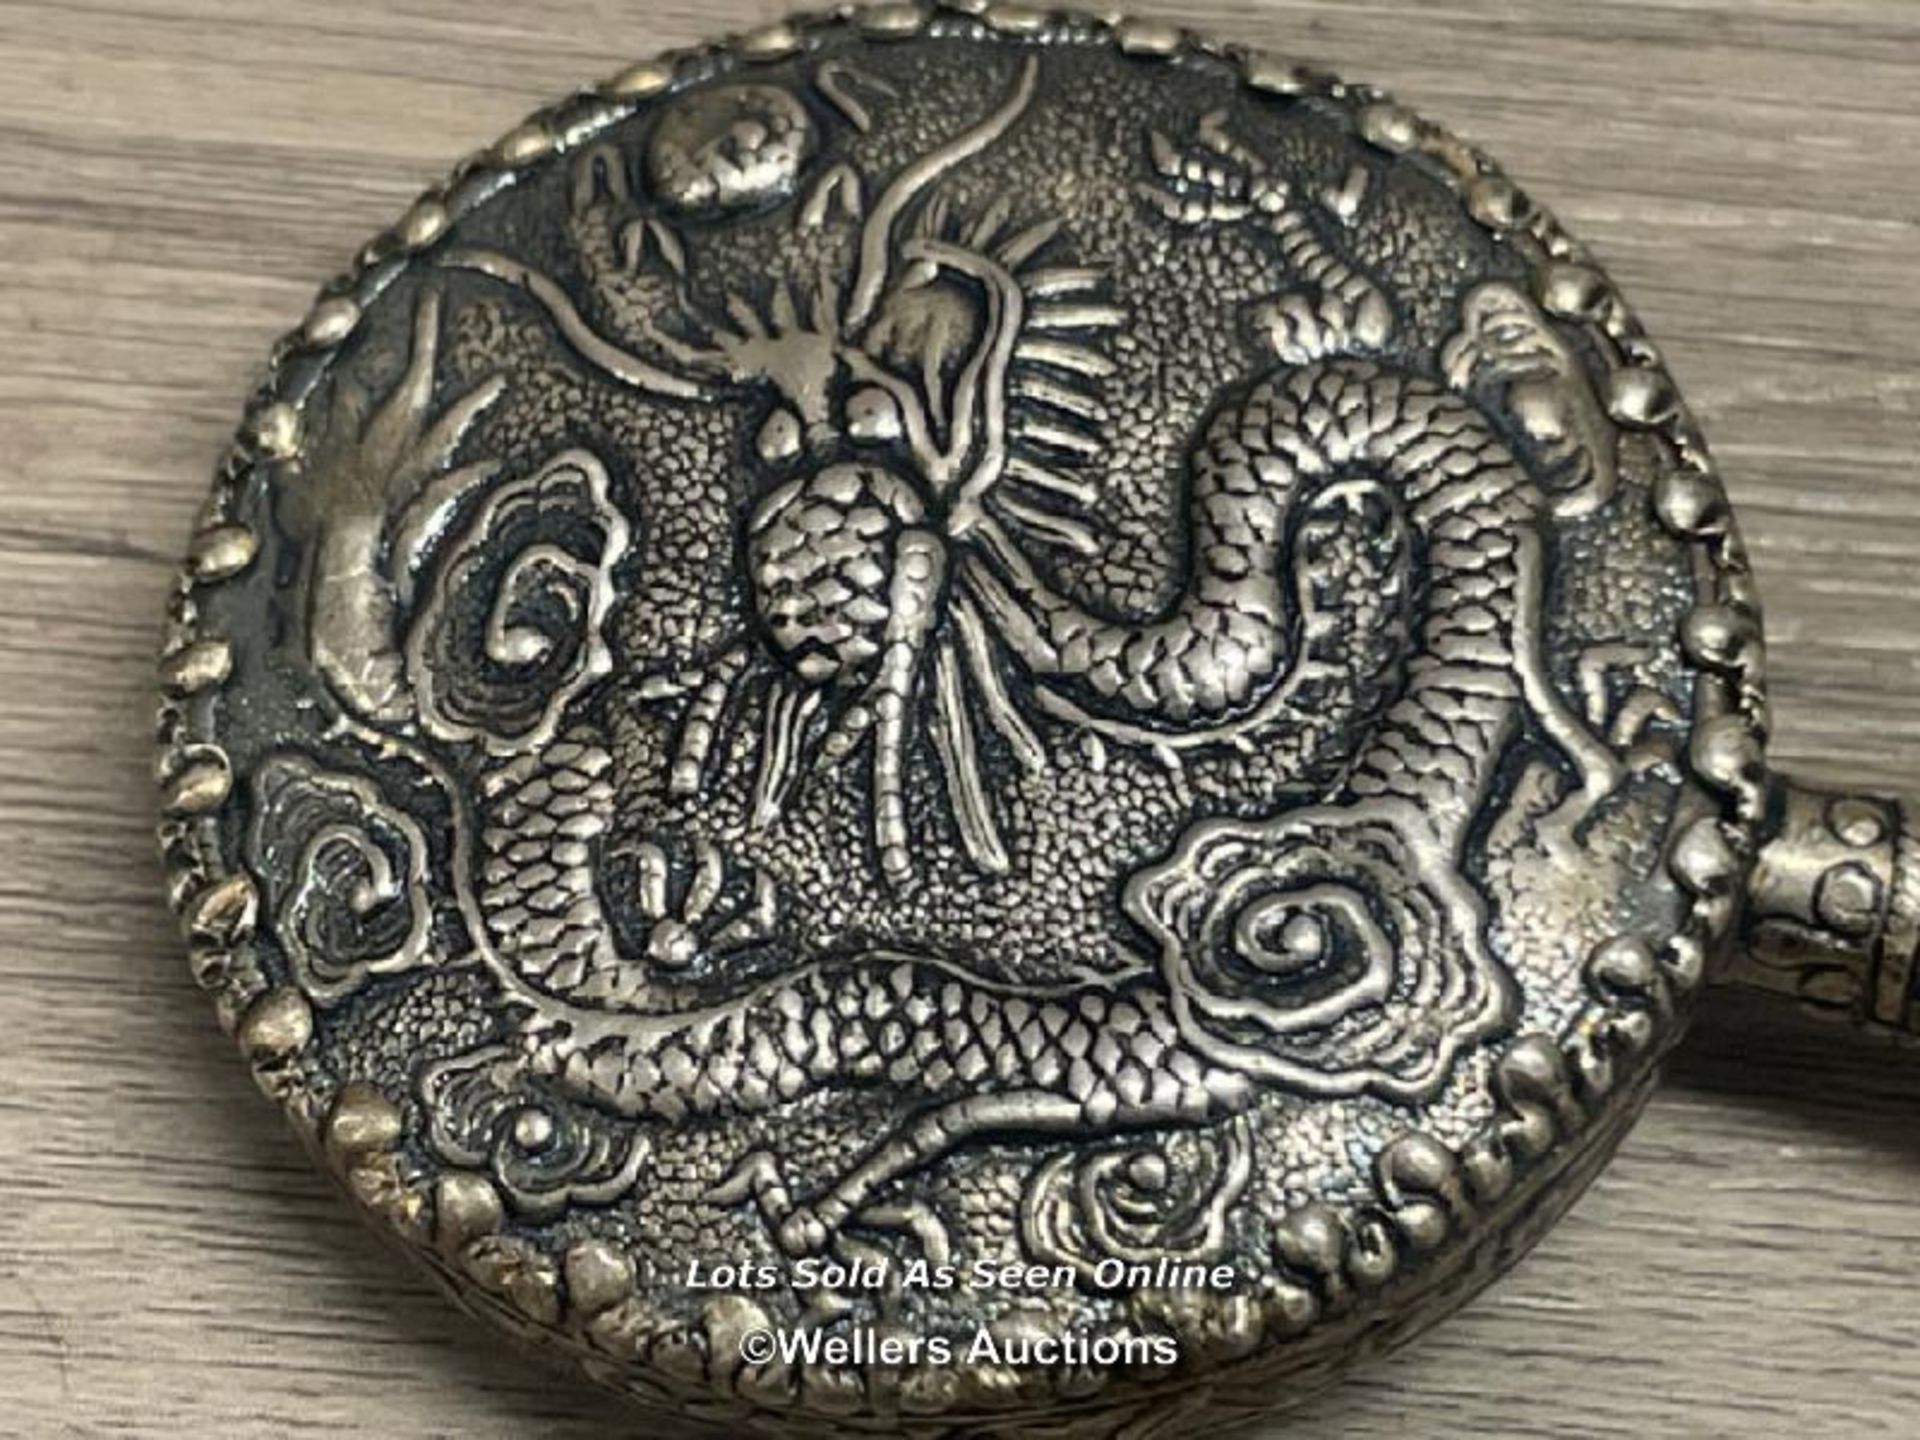 SMALL CHINESE SILVERED HAND MIRROR DECORATED WITH FLAMING DRAGON WITH ONYX HANDLE, 5CM DIAMETER - Image 3 of 3